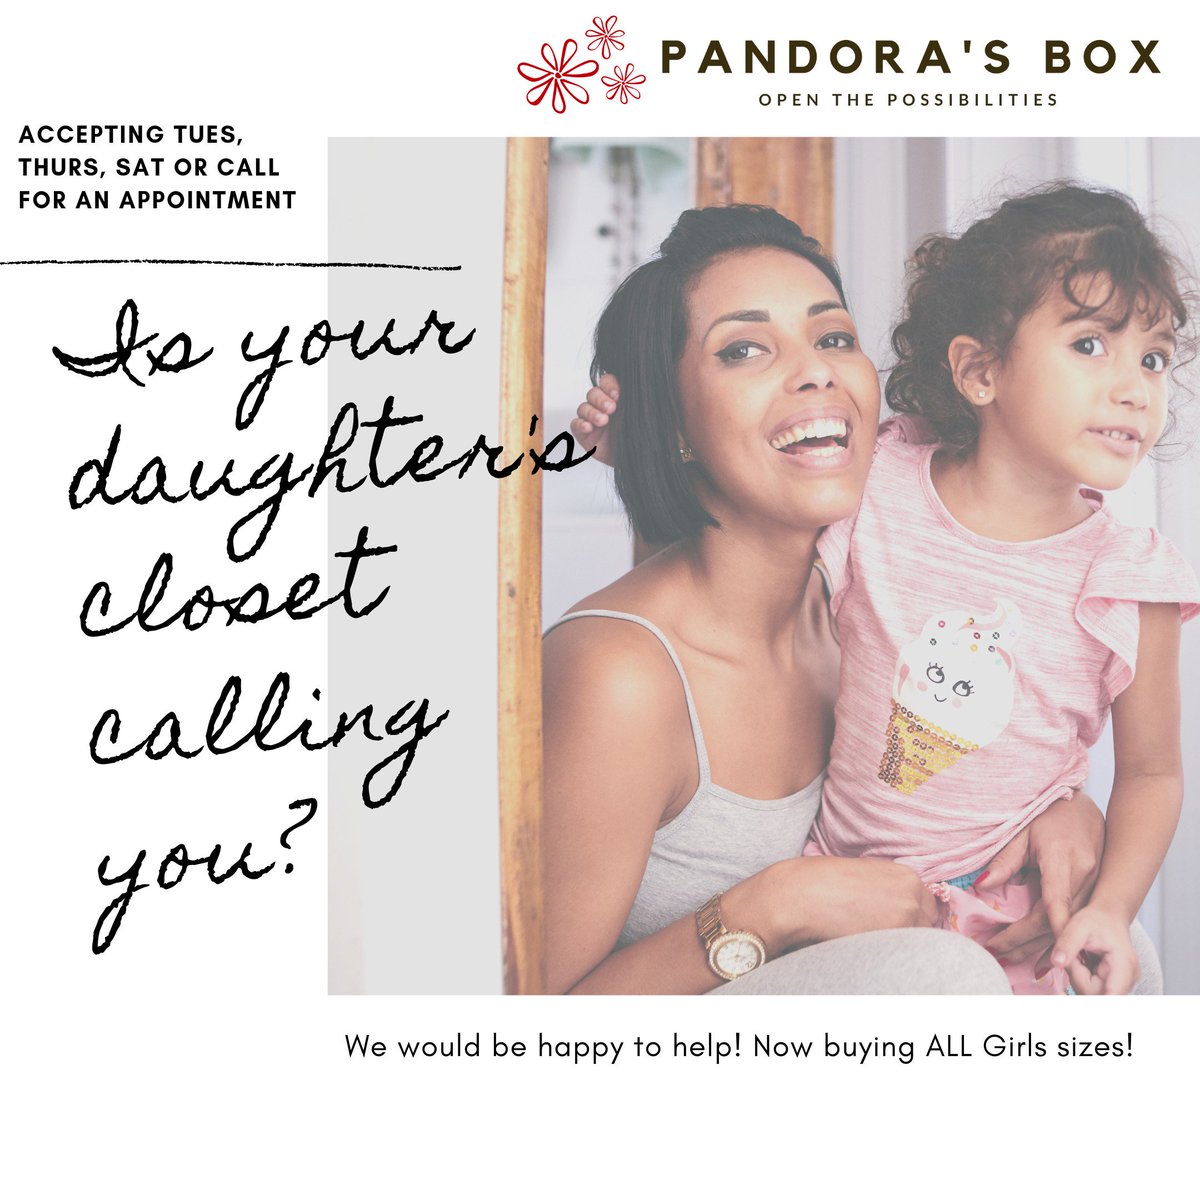 Now buying all girl sizes! Accepting on Tuesday, Thursday, and Saturday! Or call for an appointment!
#NameBrands4Less #pandorasboxresale #girlclothing